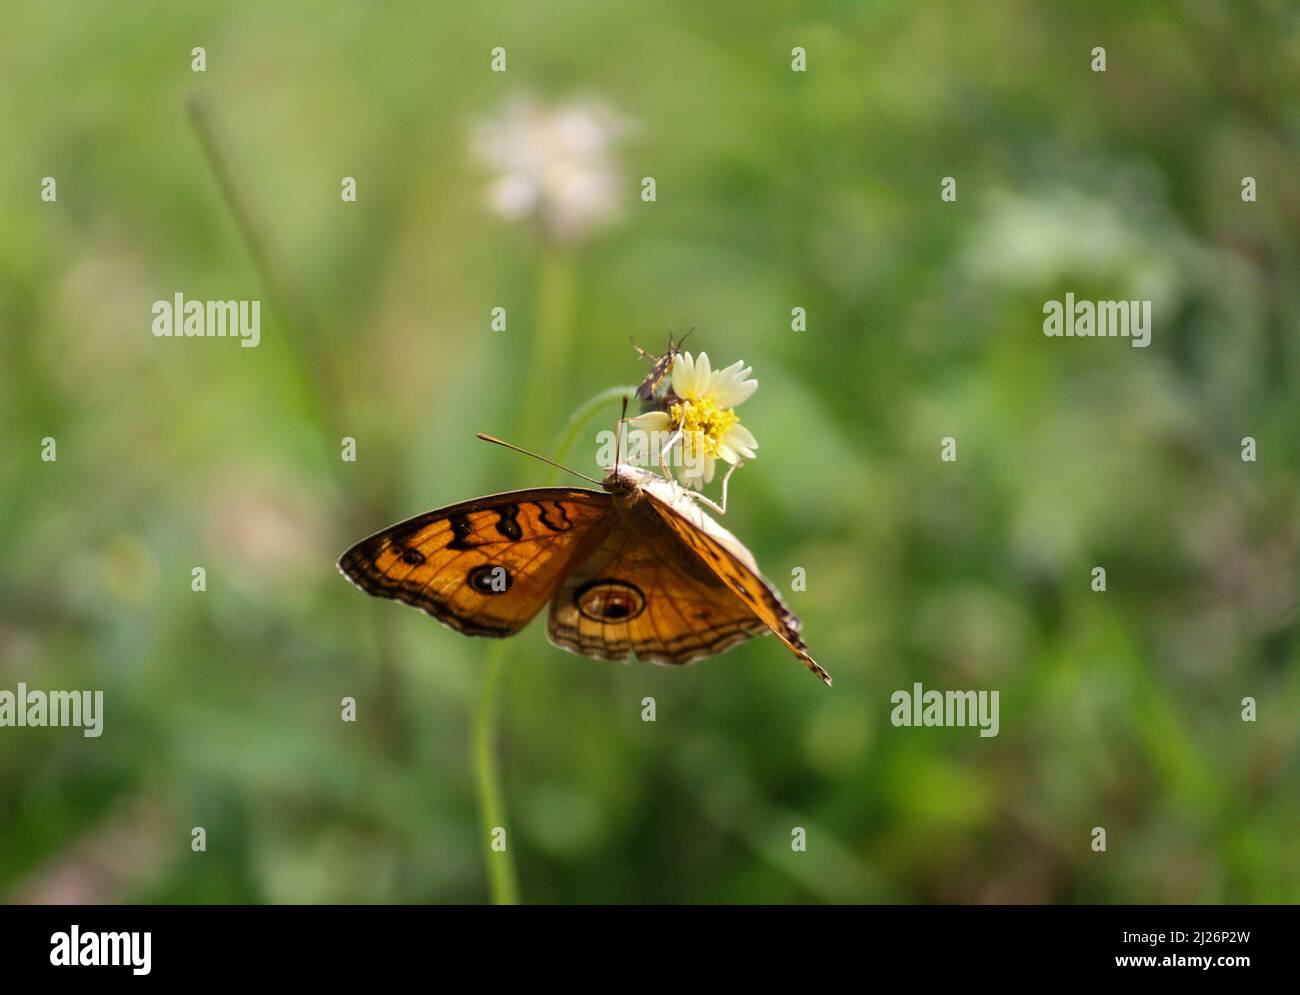 An orange butterfly perched on a white flower Stock Photo